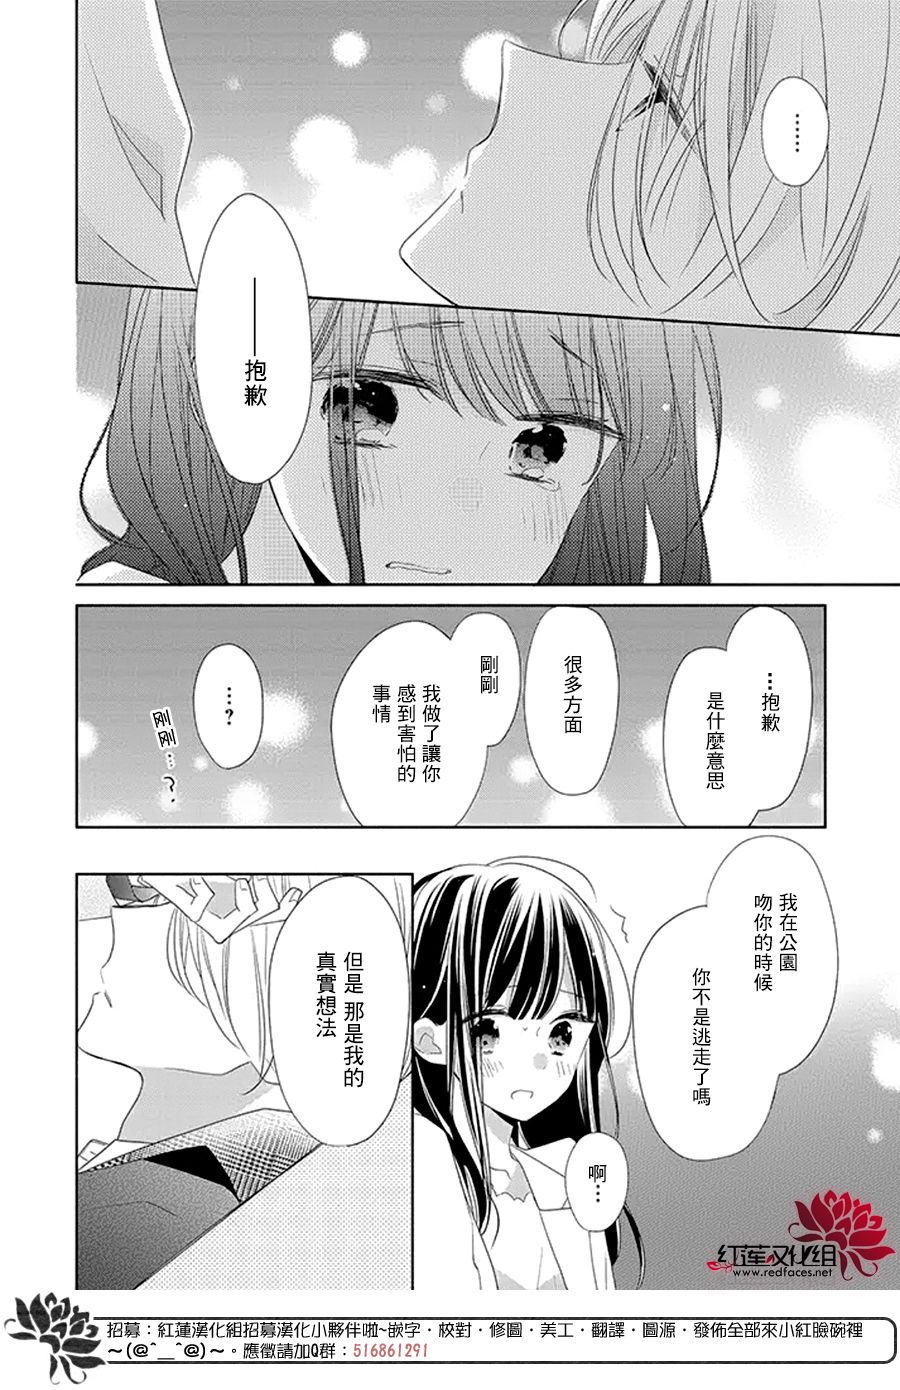 If given a second chance - 21話 - 2